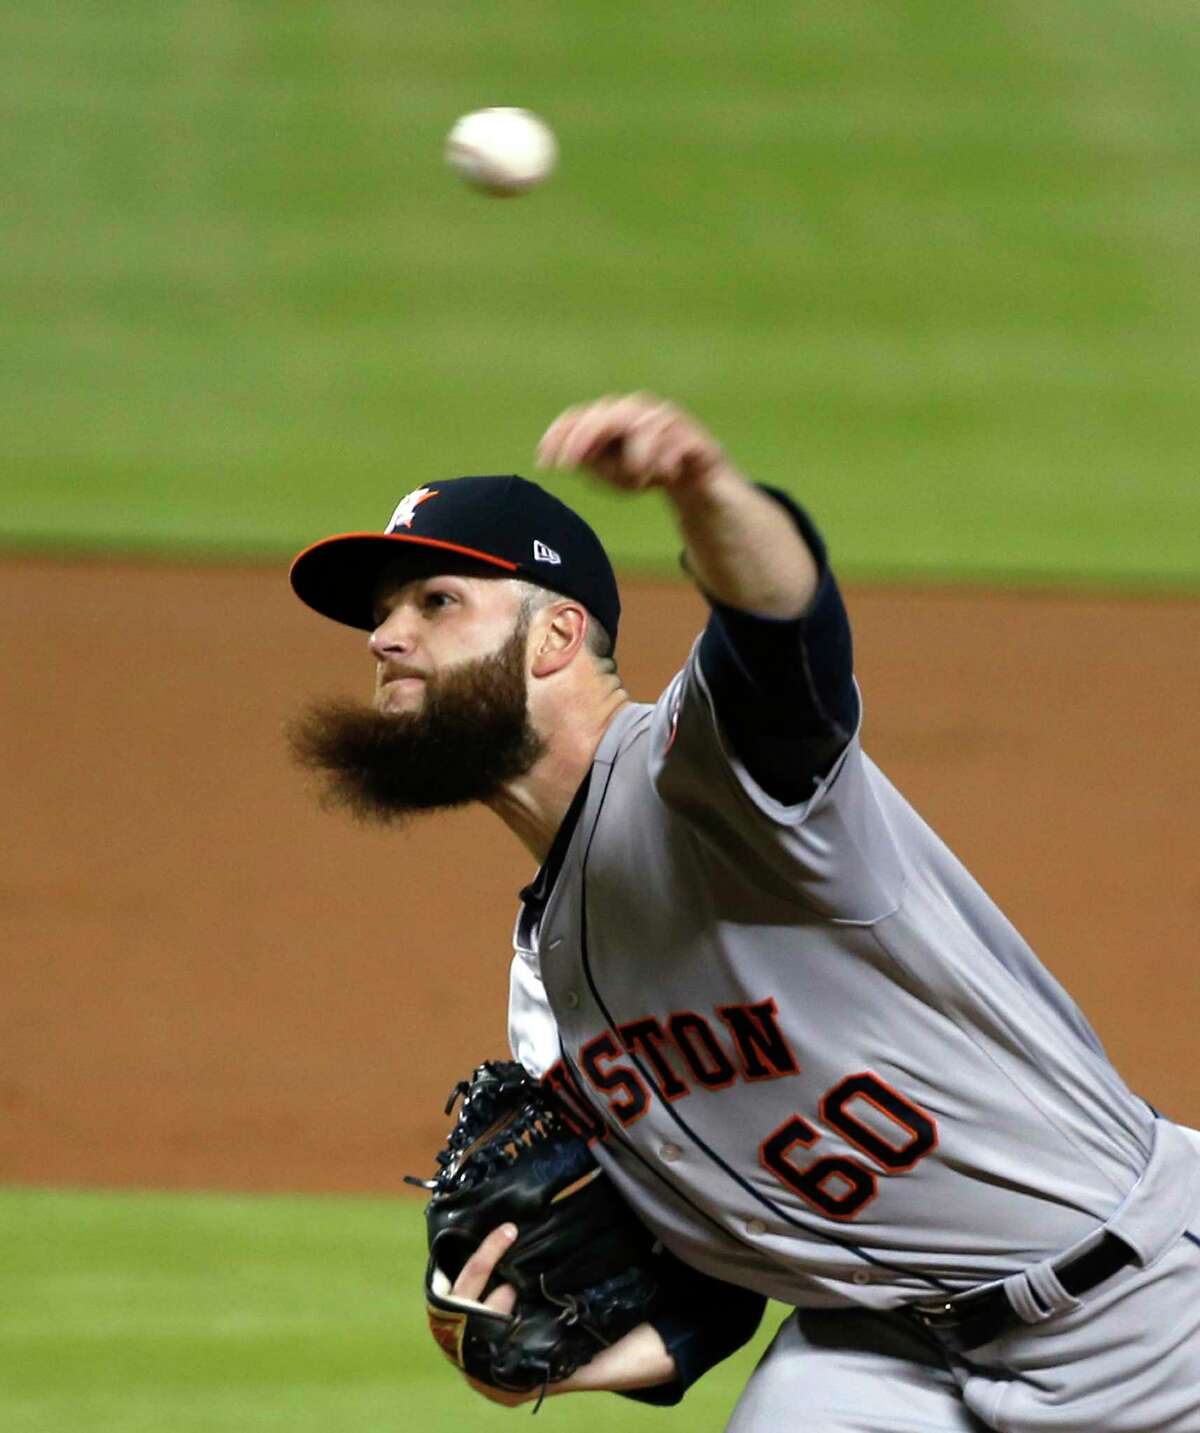 Dallas Keuchel's beard gets into the flow of a short but smooth outing. The lefthander went five innings to cruise to victory on a night the Astros had 12 runs on 14 hits.